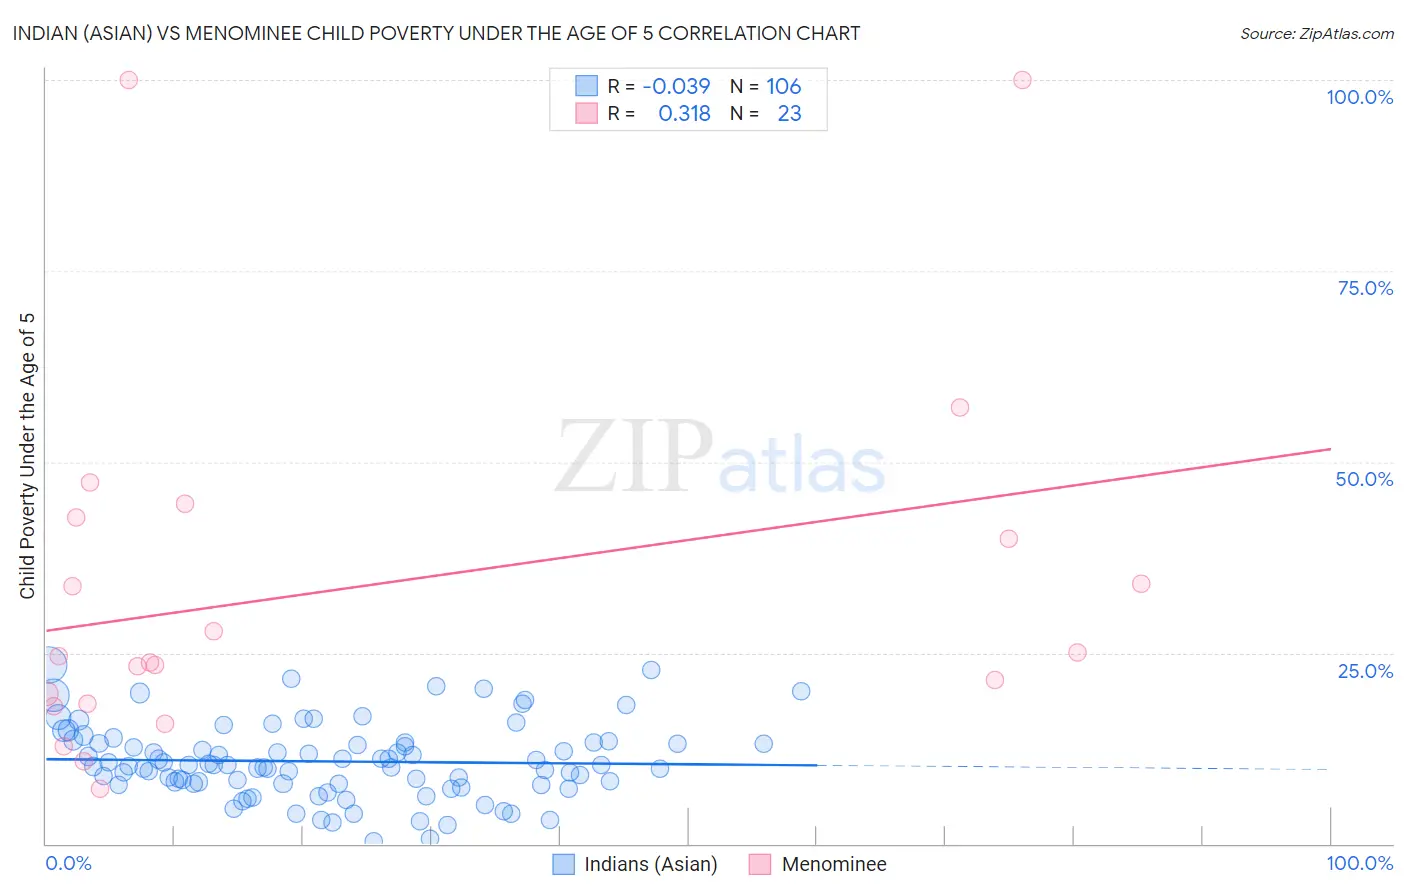 Indian (Asian) vs Menominee Child Poverty Under the Age of 5